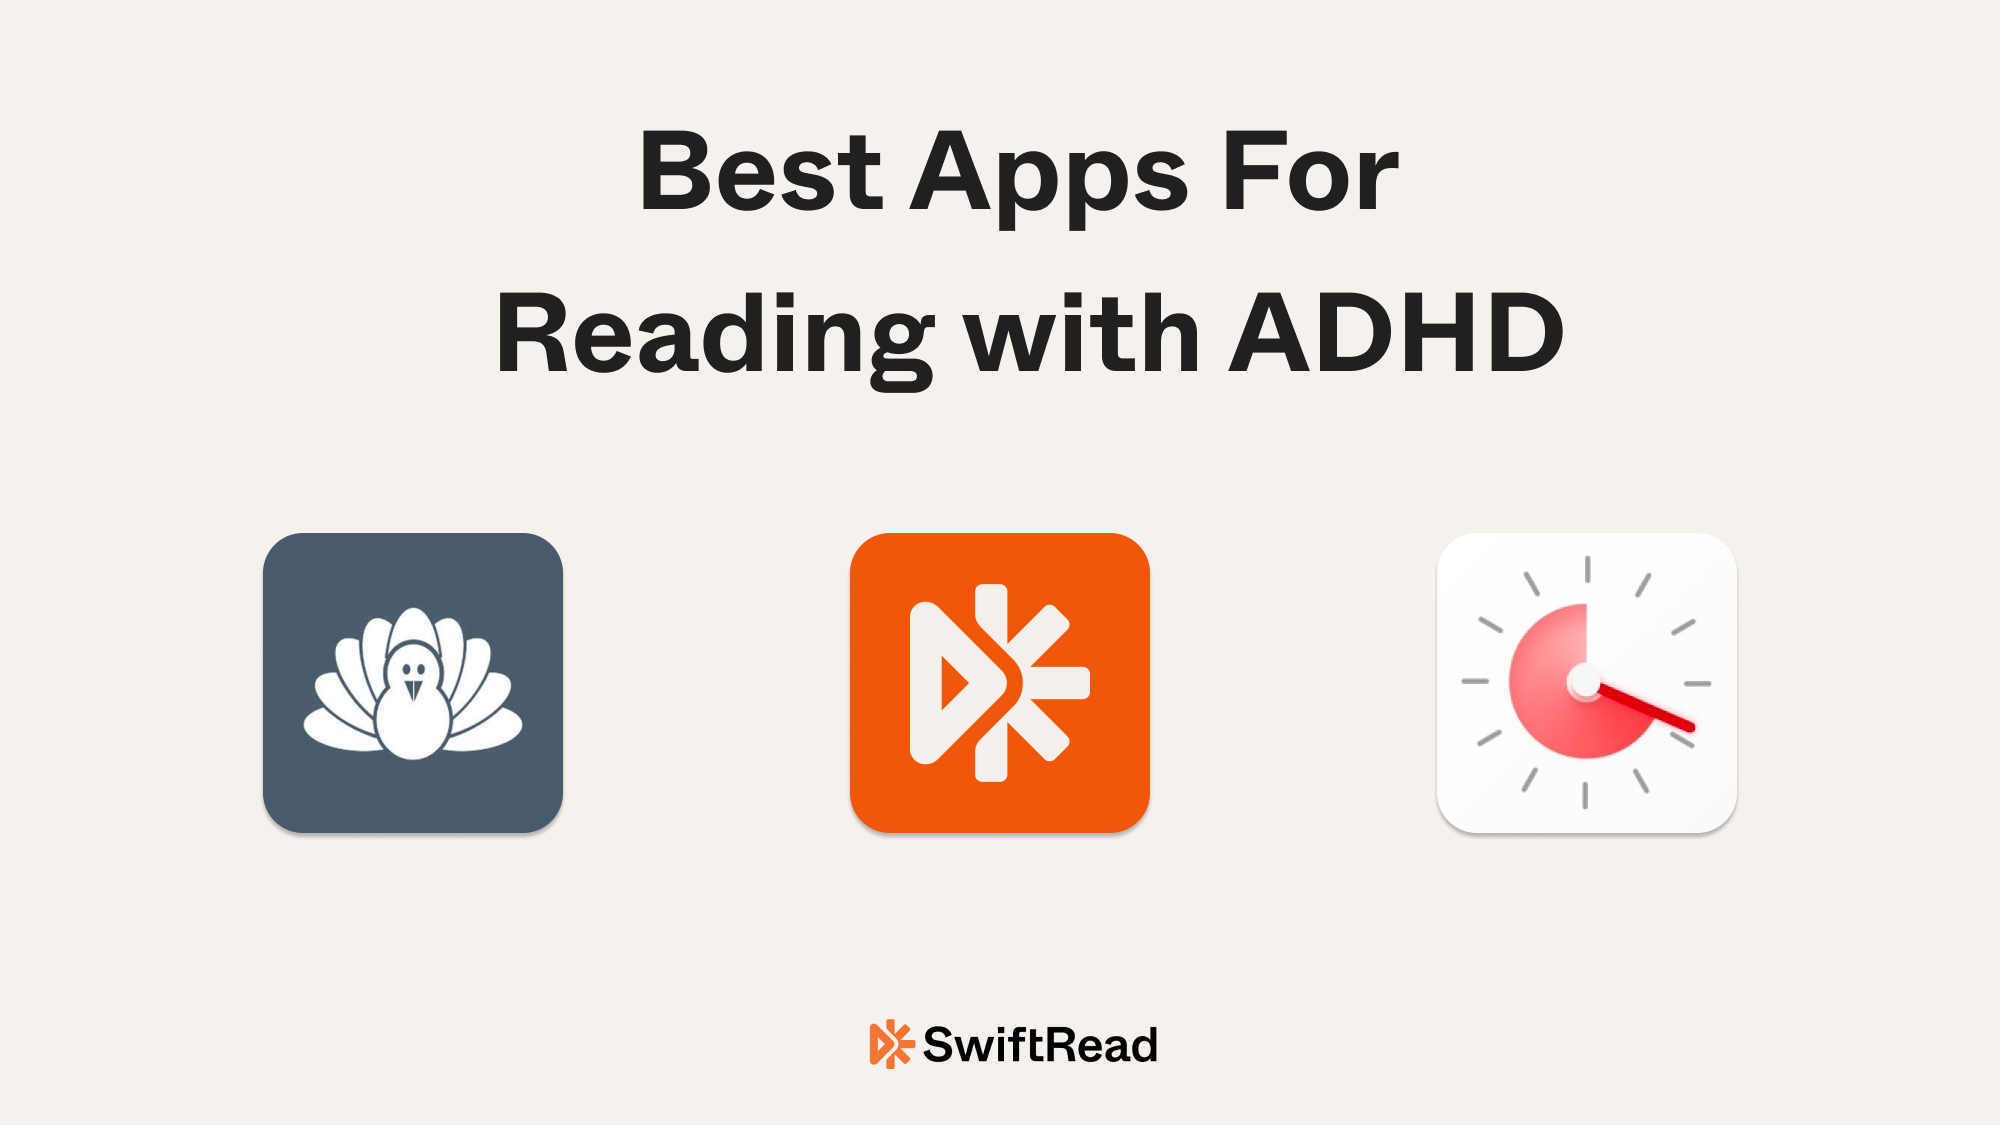 Best apps for reading with ADHD